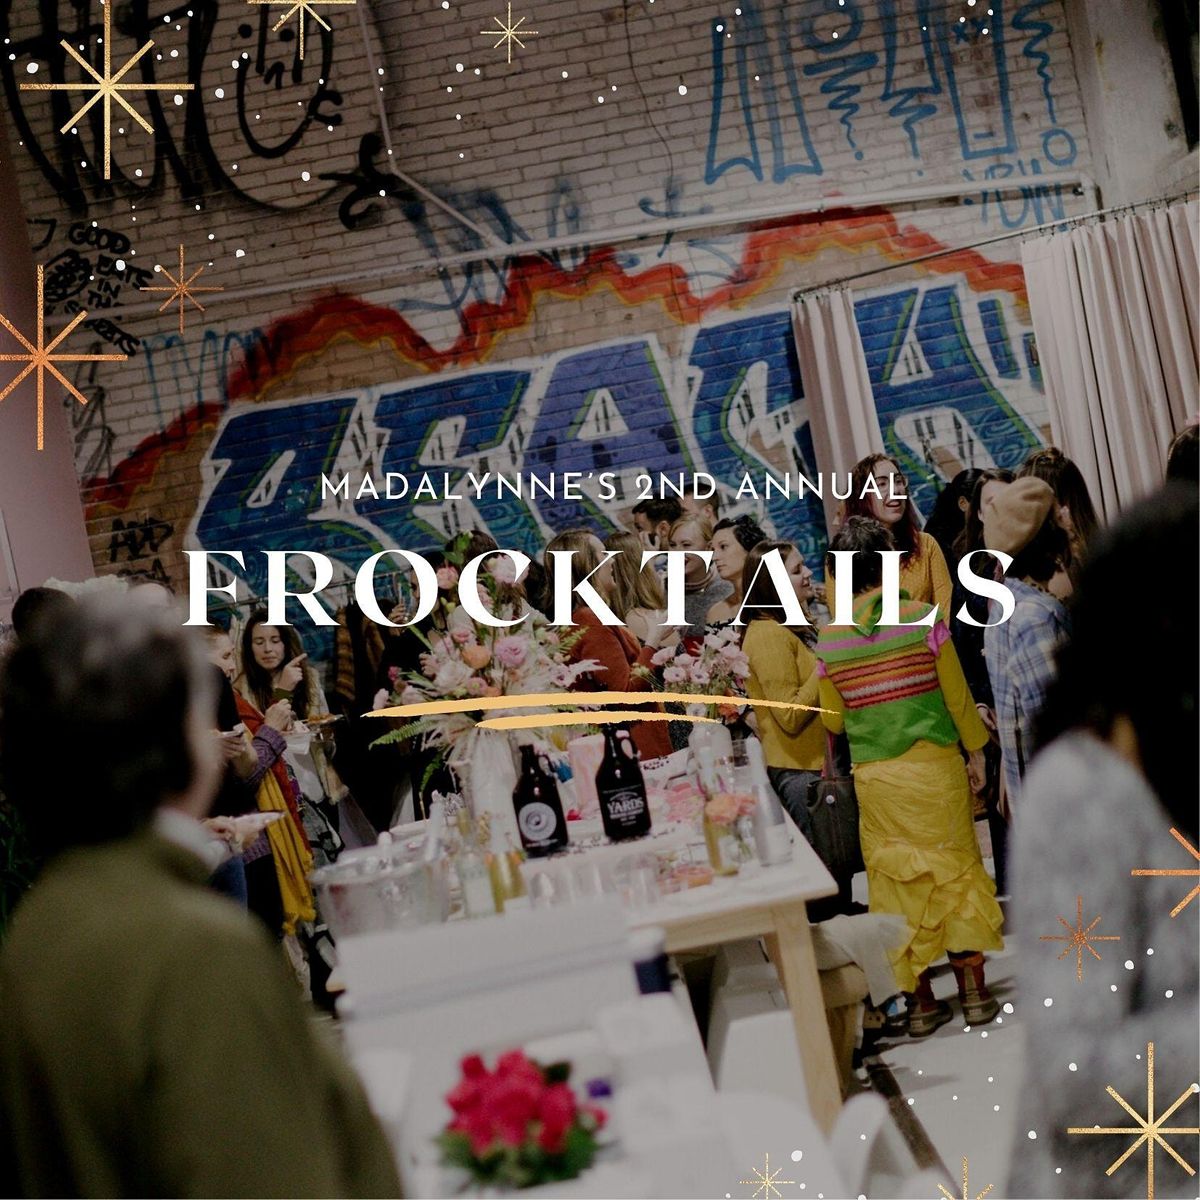 Madalynne's 2nd Annual Frocktails